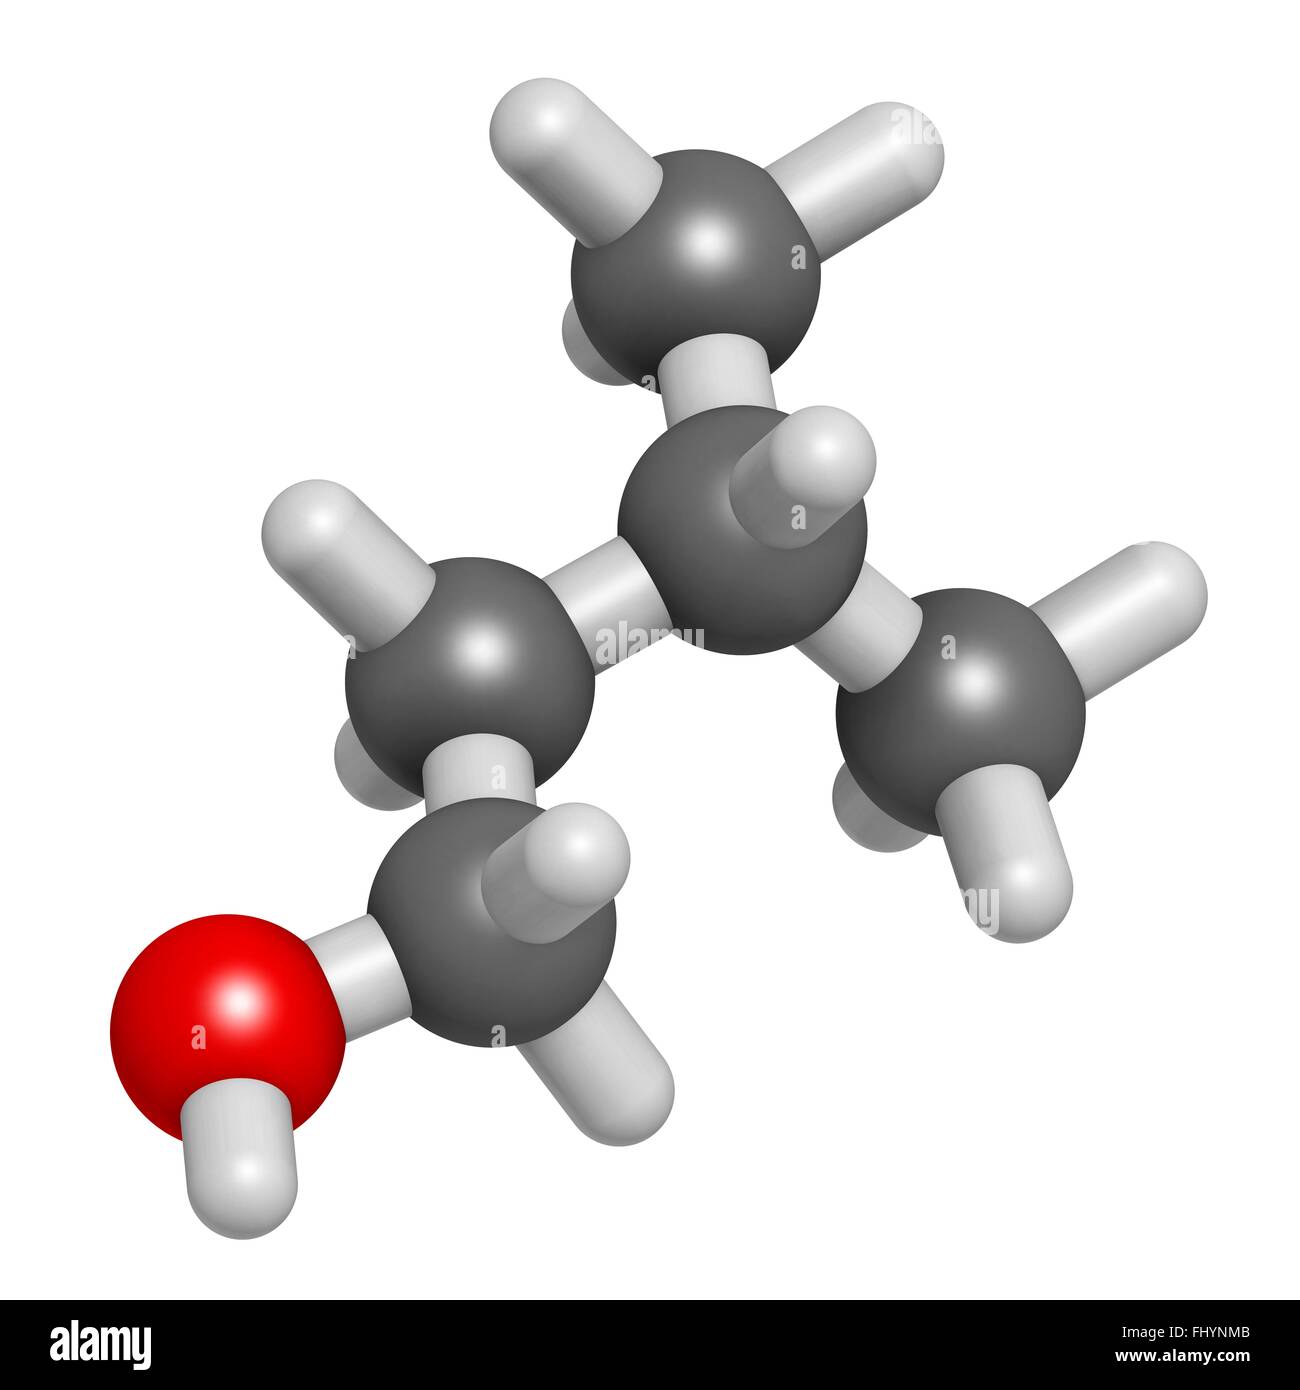 Cetyl alcohol molecule, illustration - Stock Image - F030/5196 - Science  Photo Library